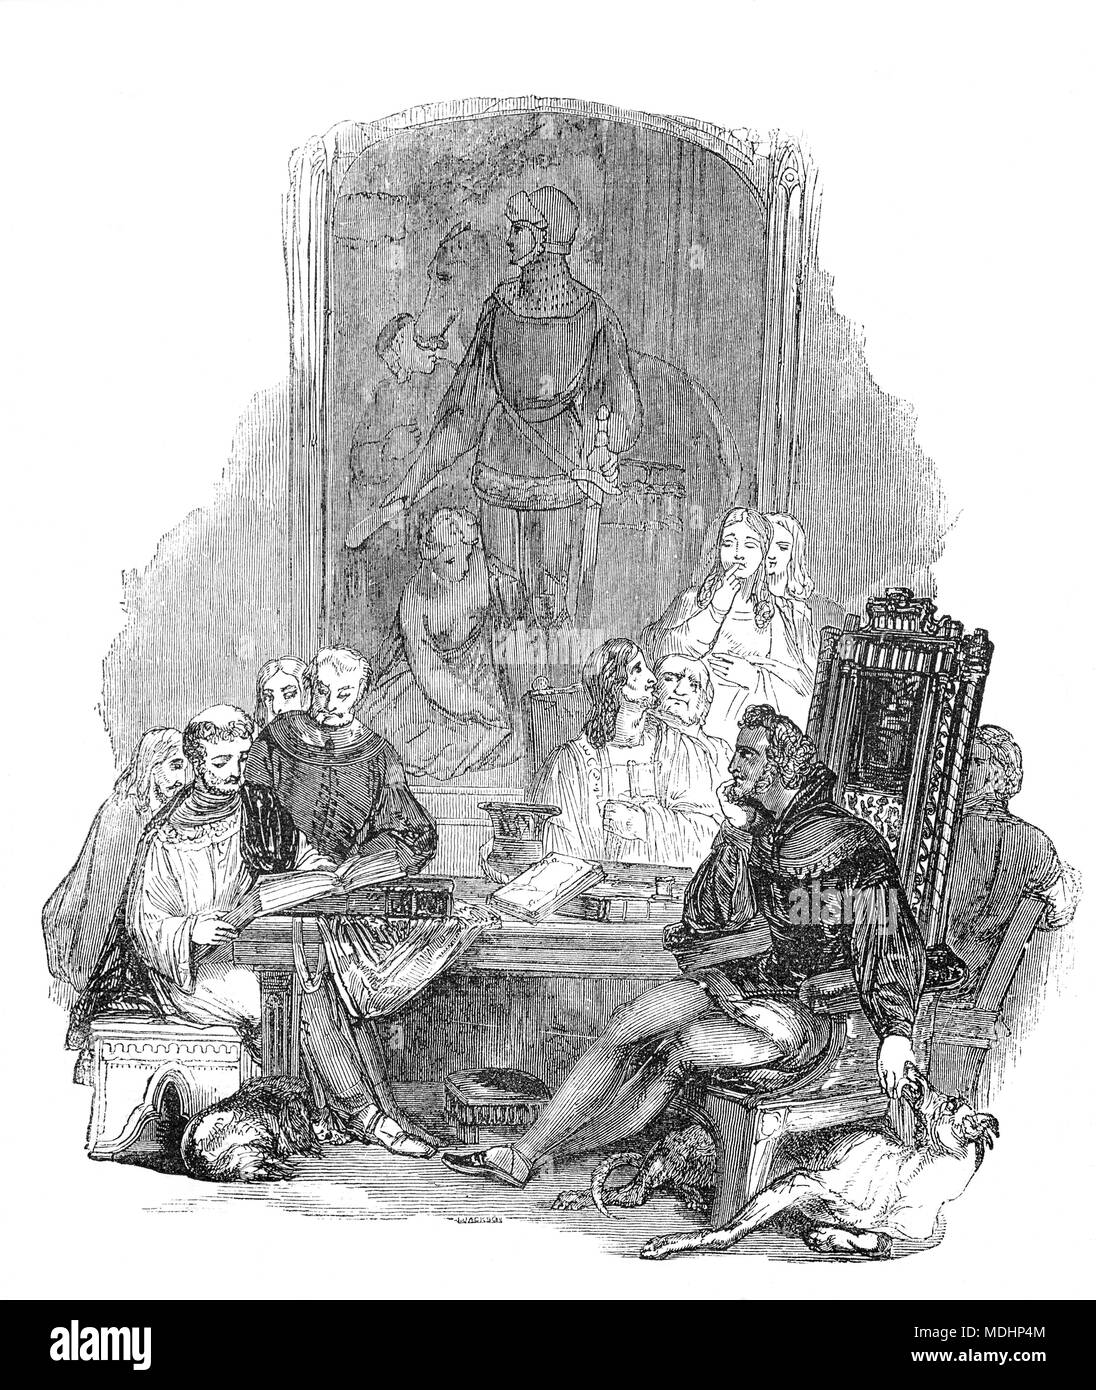 Jean Froissart reading to the Count of Foix who ruled the independent County of Foix, in what is now southern France, during the Middle Ages. The House of Foix eventually extended its power across the Pyrenees mountain range, moving their court to Pau in Béarn. The last Count unified with King Henry IV of France in 1607.  Jean Froissart (1337 – 1405) was a French-speaking medieval author and court historian from the Low Countries. His Chronicles have been recognised as the chief expression of the chivalric revival of the 14th century Kingdom of England and Kingdom of France. Stock Photo